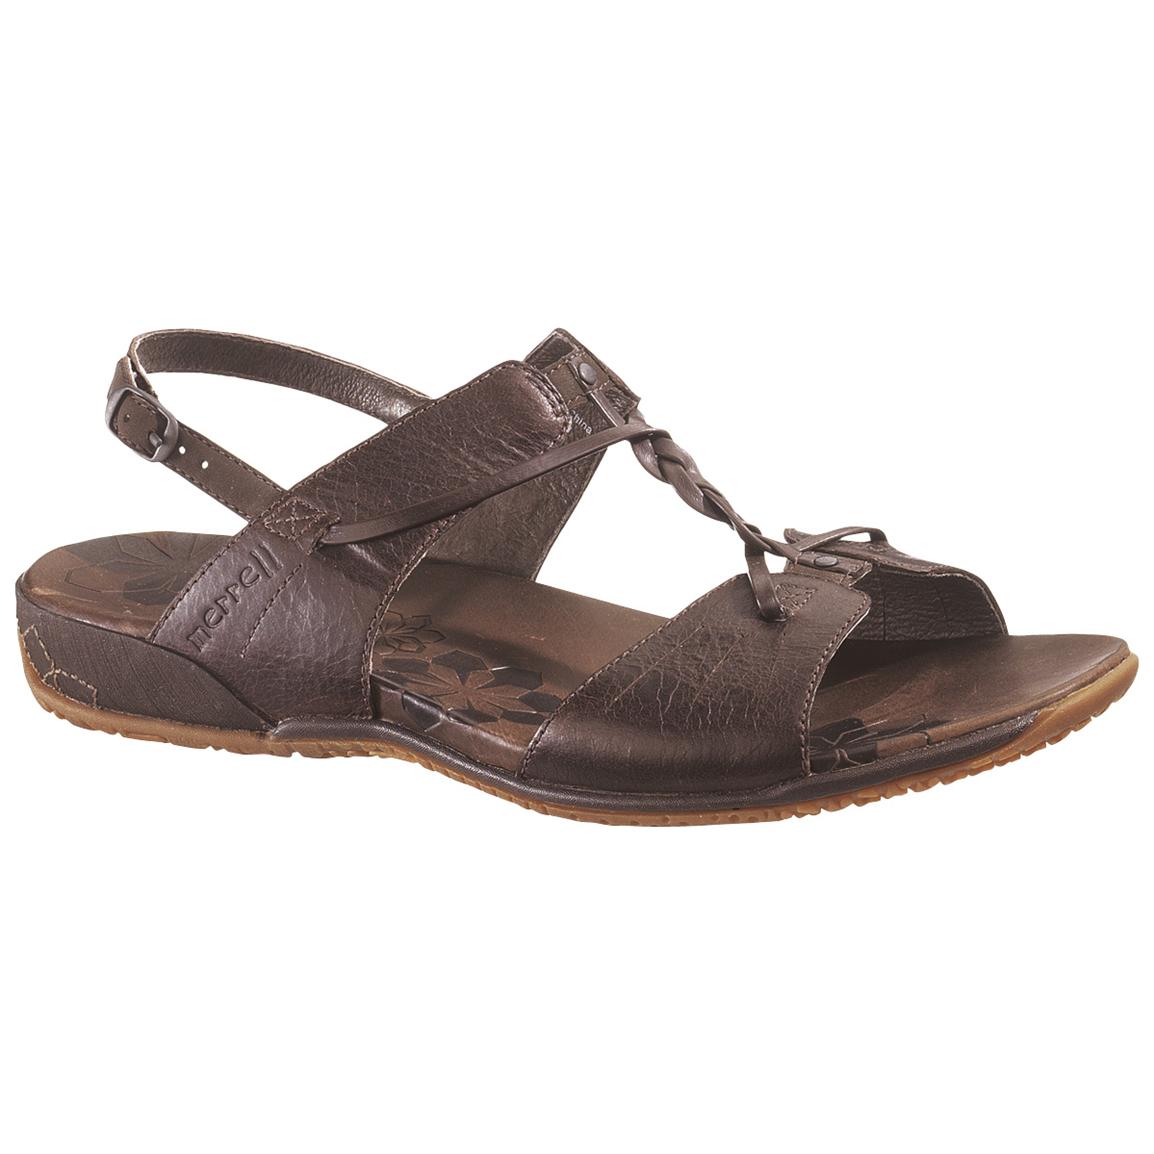 Women's Merrell® Micca Sandals - 177769, Casual Shoes at Sportsman's Guide